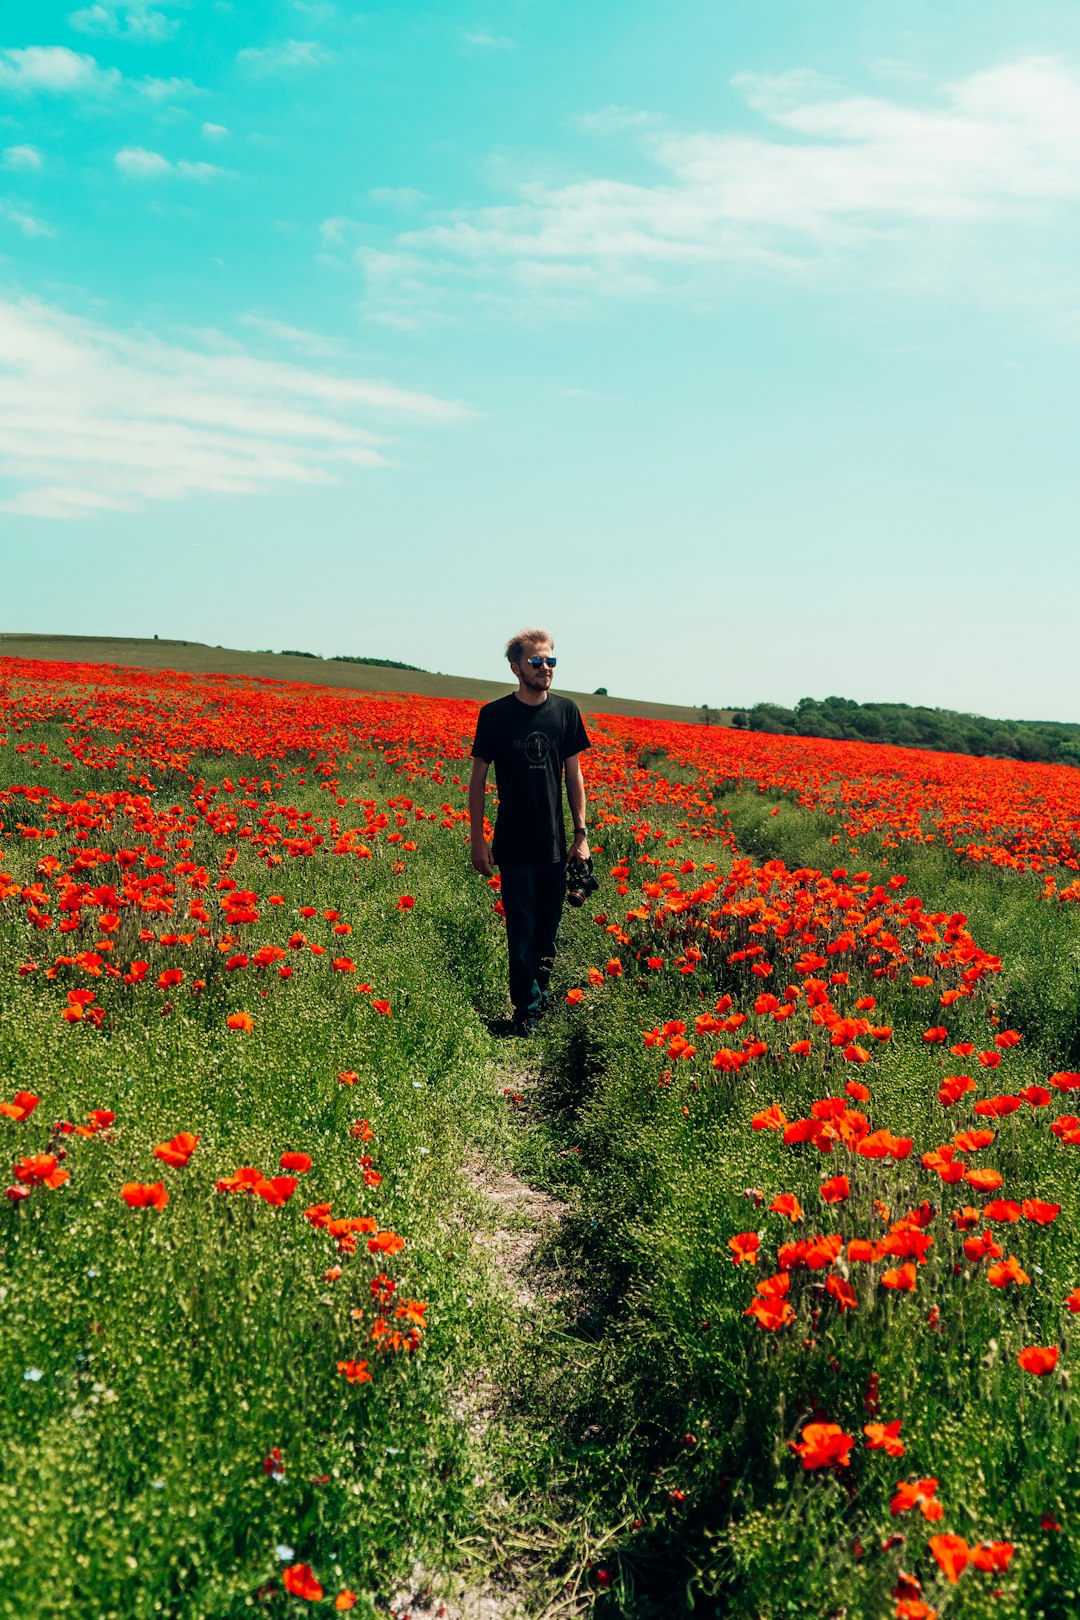 man in black jacket standing on red flower field during daytime